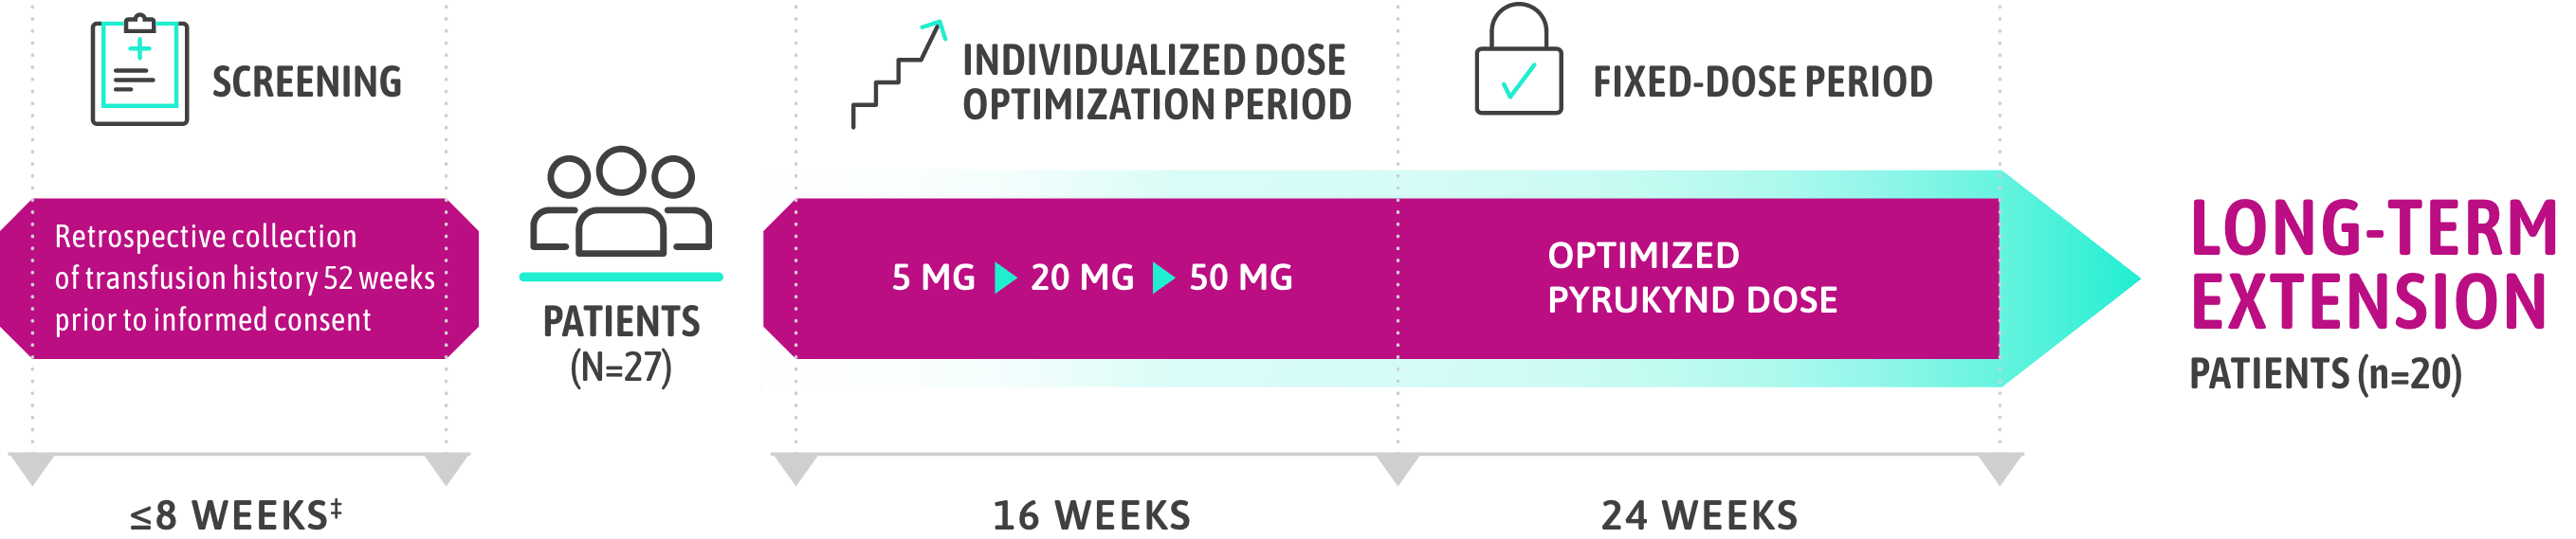 chart illustrating the ACTIVATE-T study design, from screening, to individualized dose optimization period, to fixed-dose period, ending with long-term extension